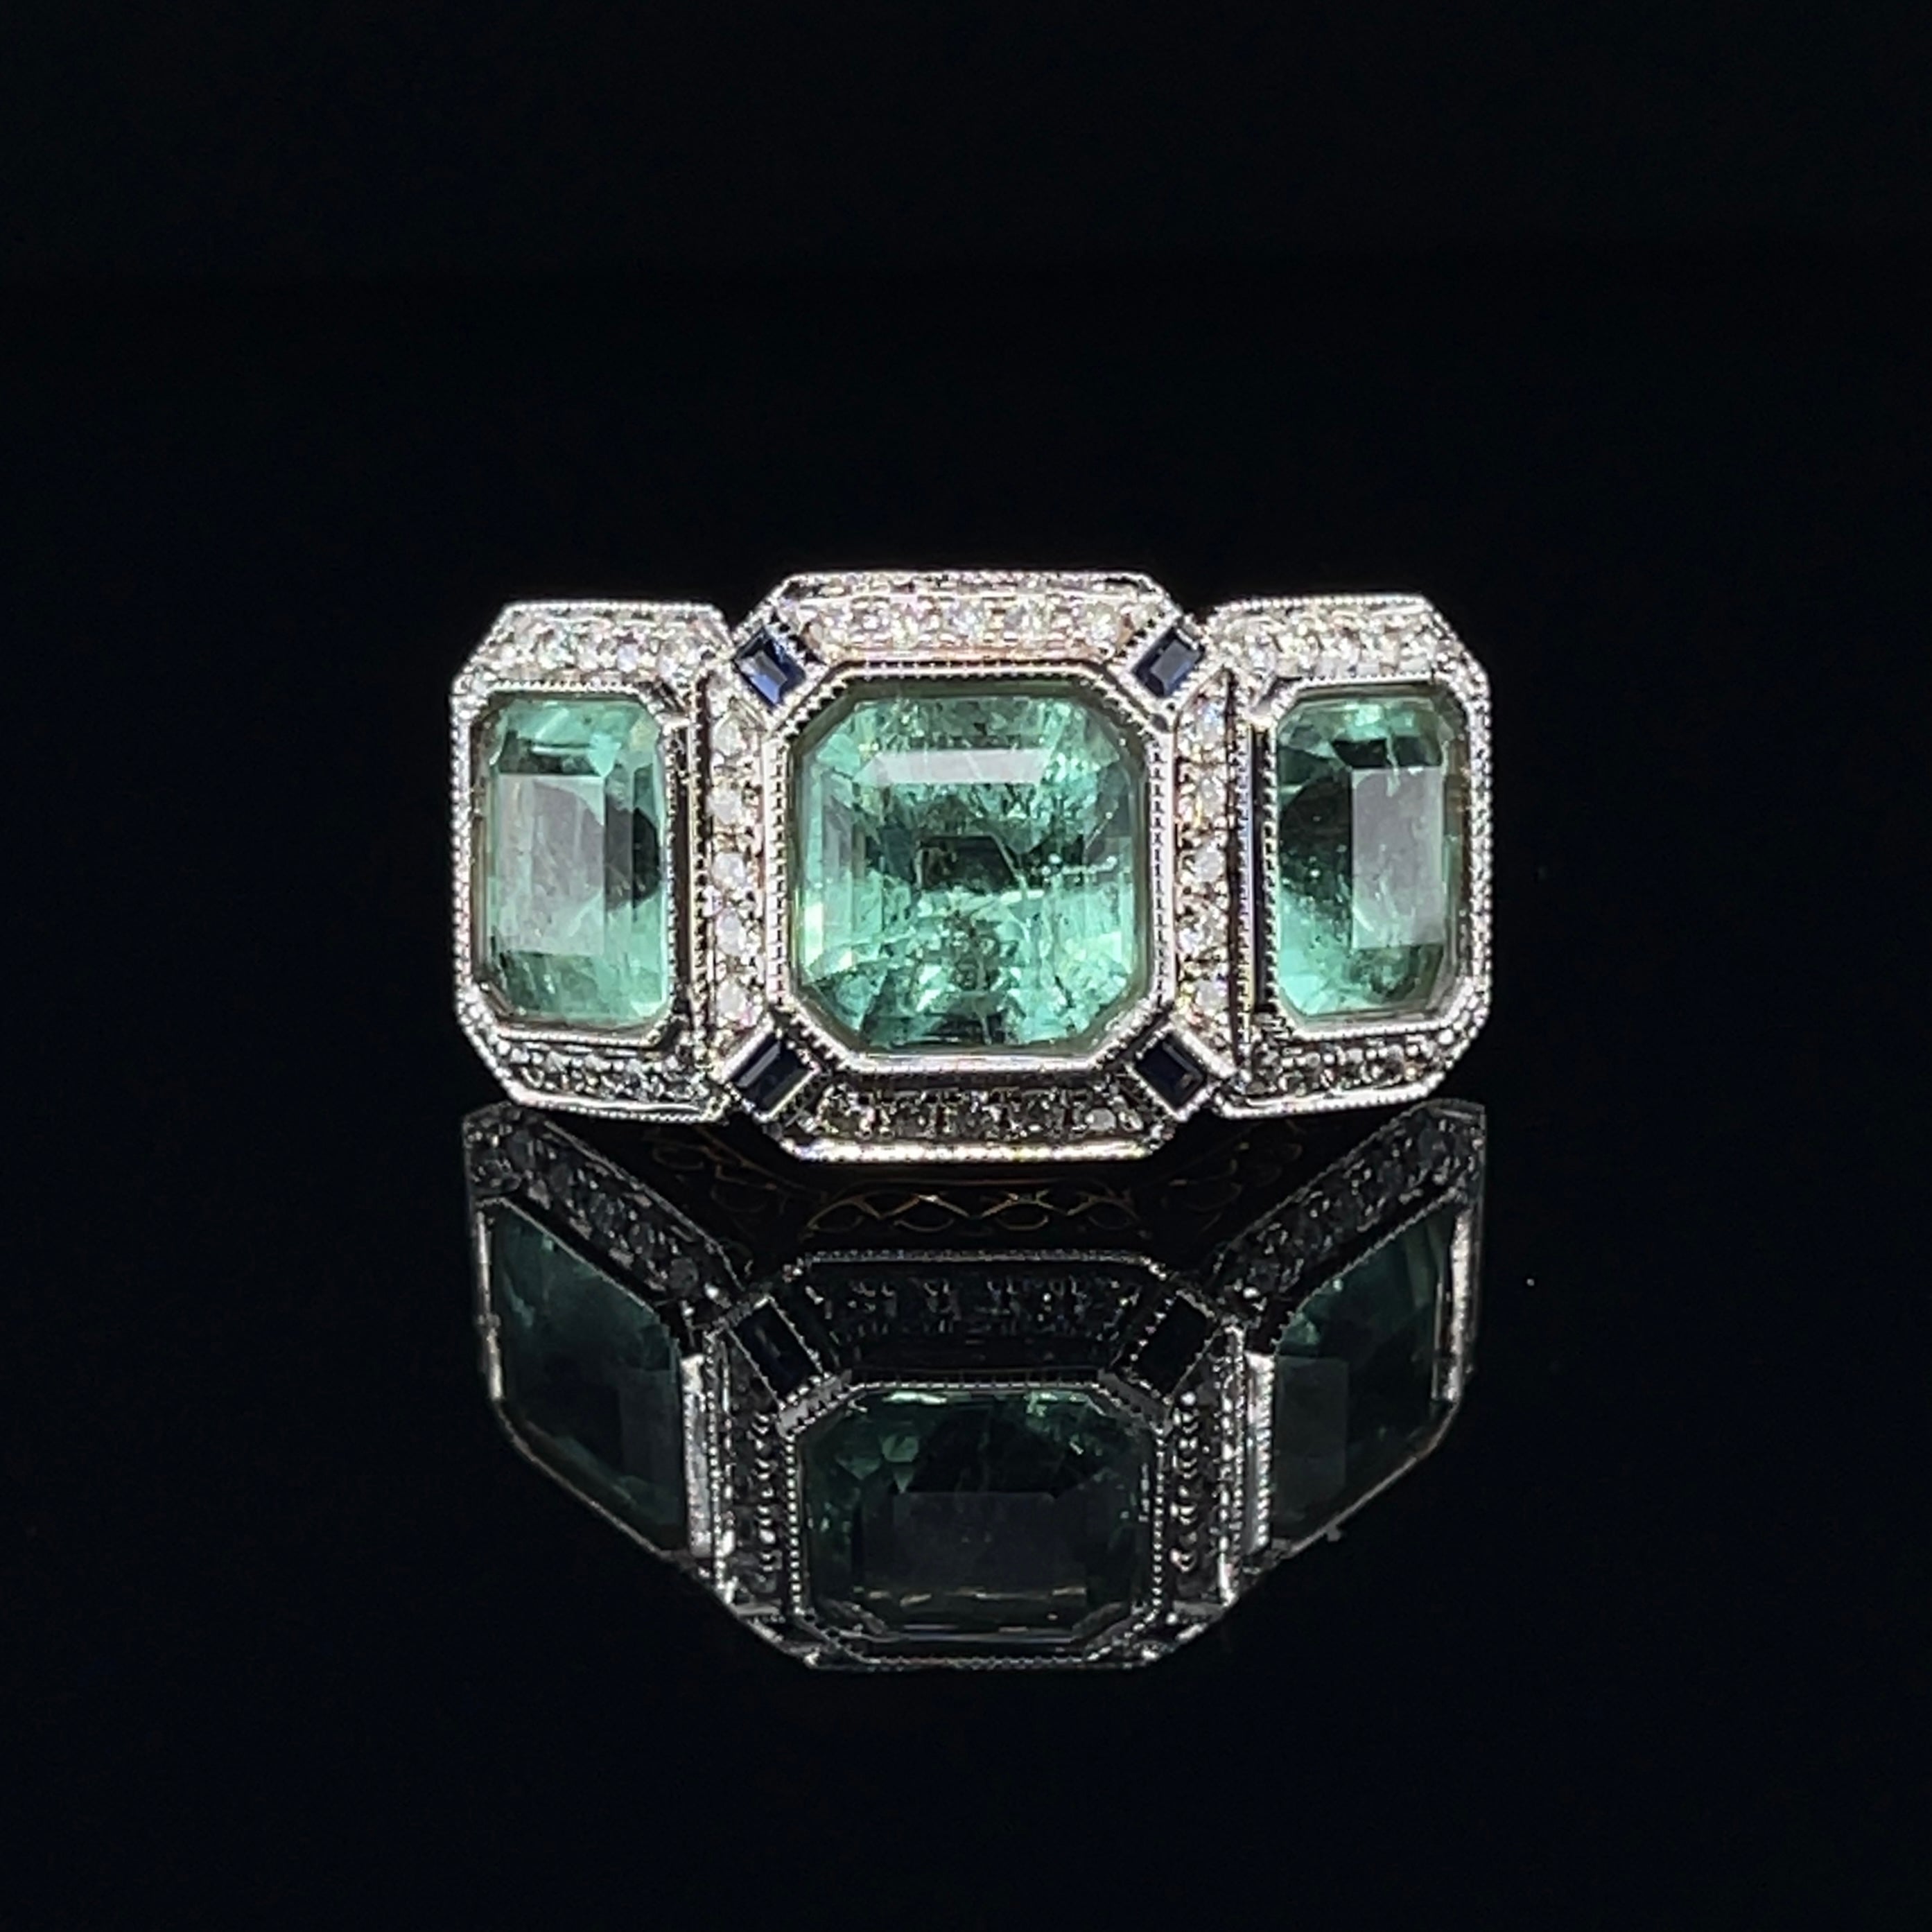 Colombian (based on my opinion) Emerald cut emeralds, crafted in eighteen karat rose gold, half round, tapered shank with closed back bezel settings with single halo surrounds, featuring a stunning selection of  fifty-four claw set round brilliant